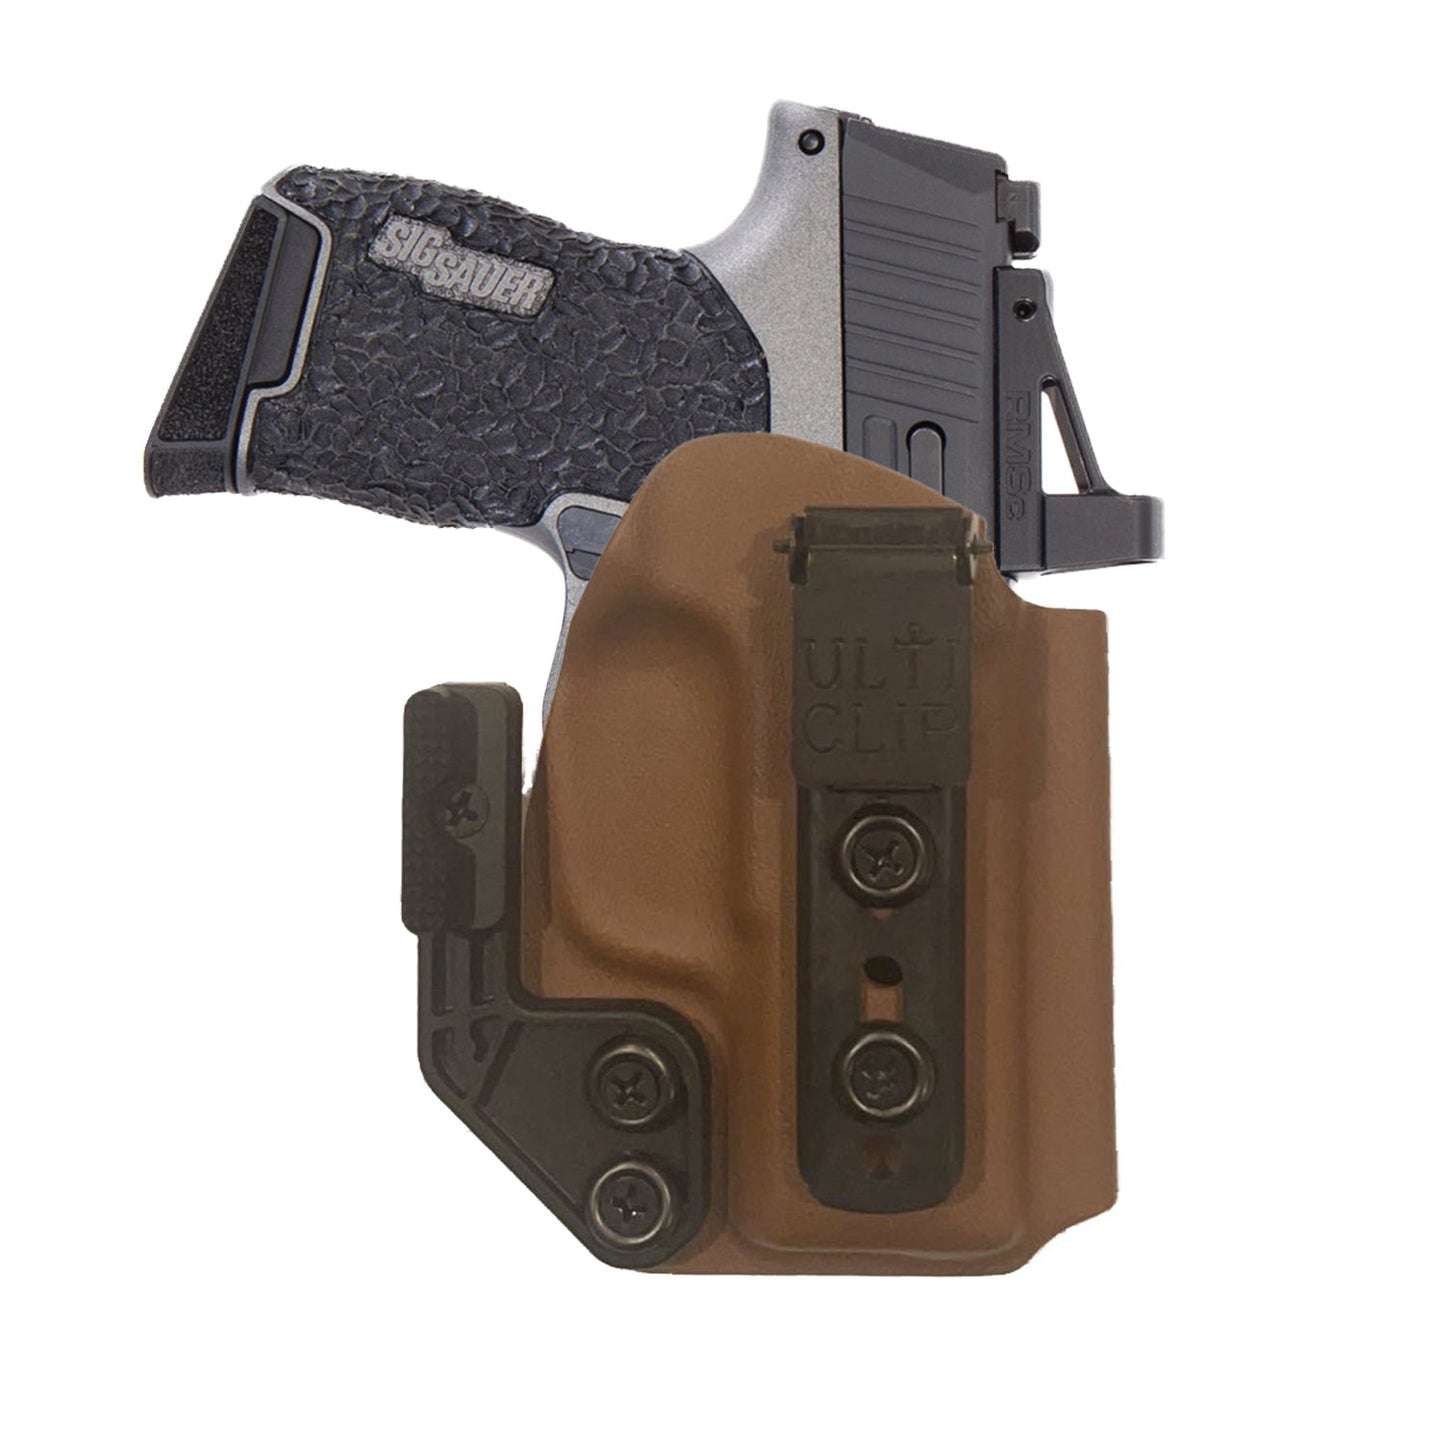 SIG P365/ P365X WIth XSC Light (ULTI-CLIP 3) IWB (Inside The Waistband Holster)